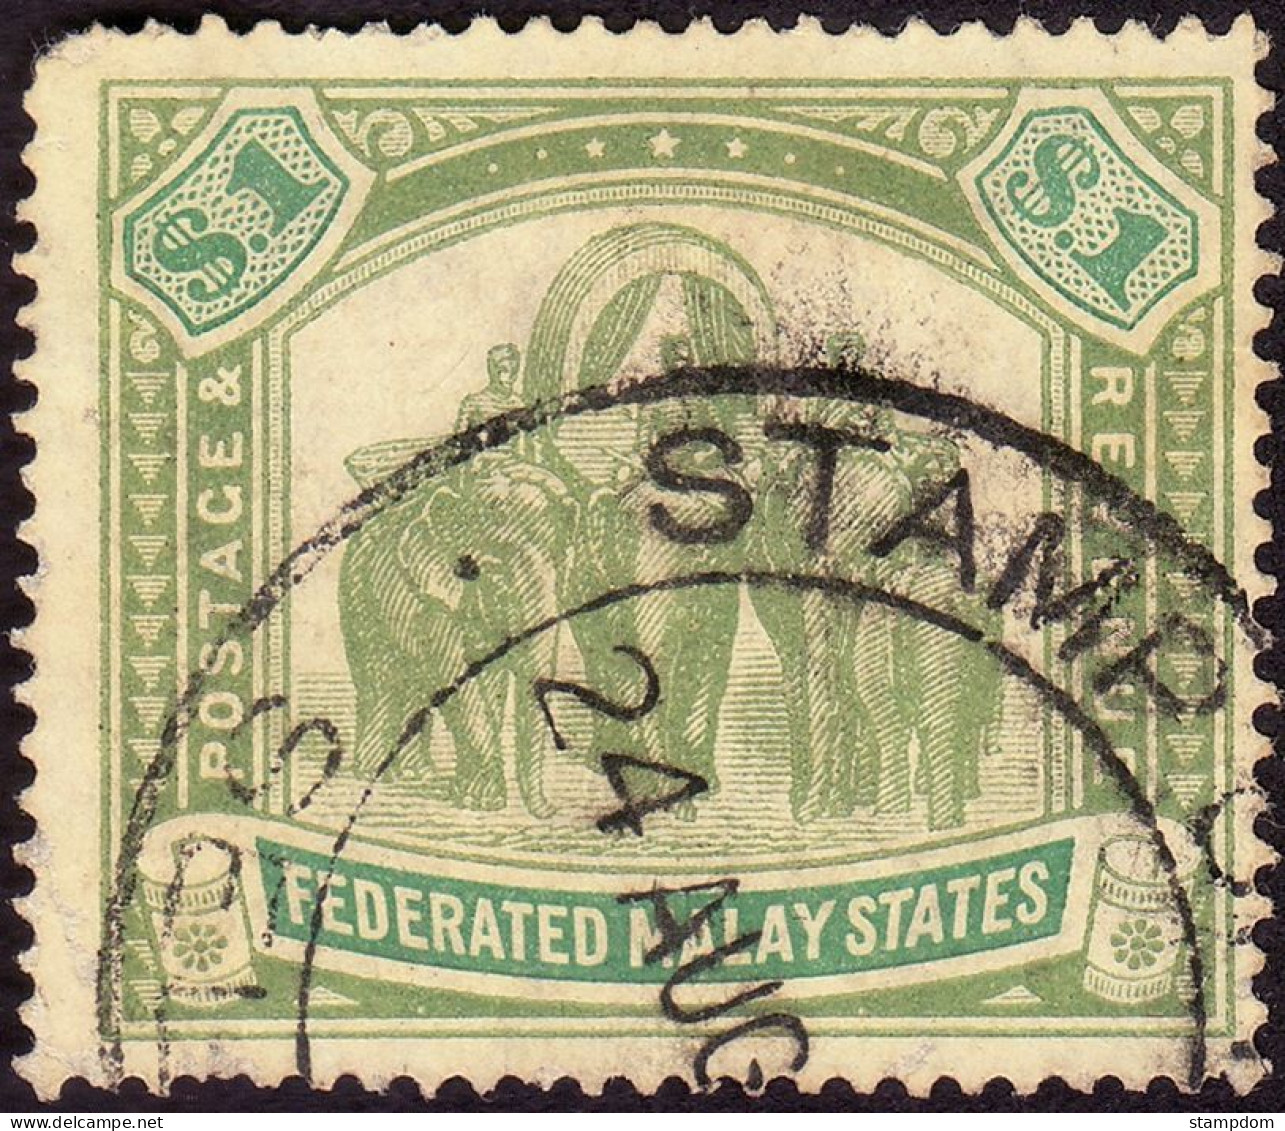 FEDERATED MALAY STATES FMS 1907 $1 Wmk.MCA Sc#34 -USED Fiscal Cancel - THIN Spot On One Bottom Perforation @TE31 - Federated Malay States